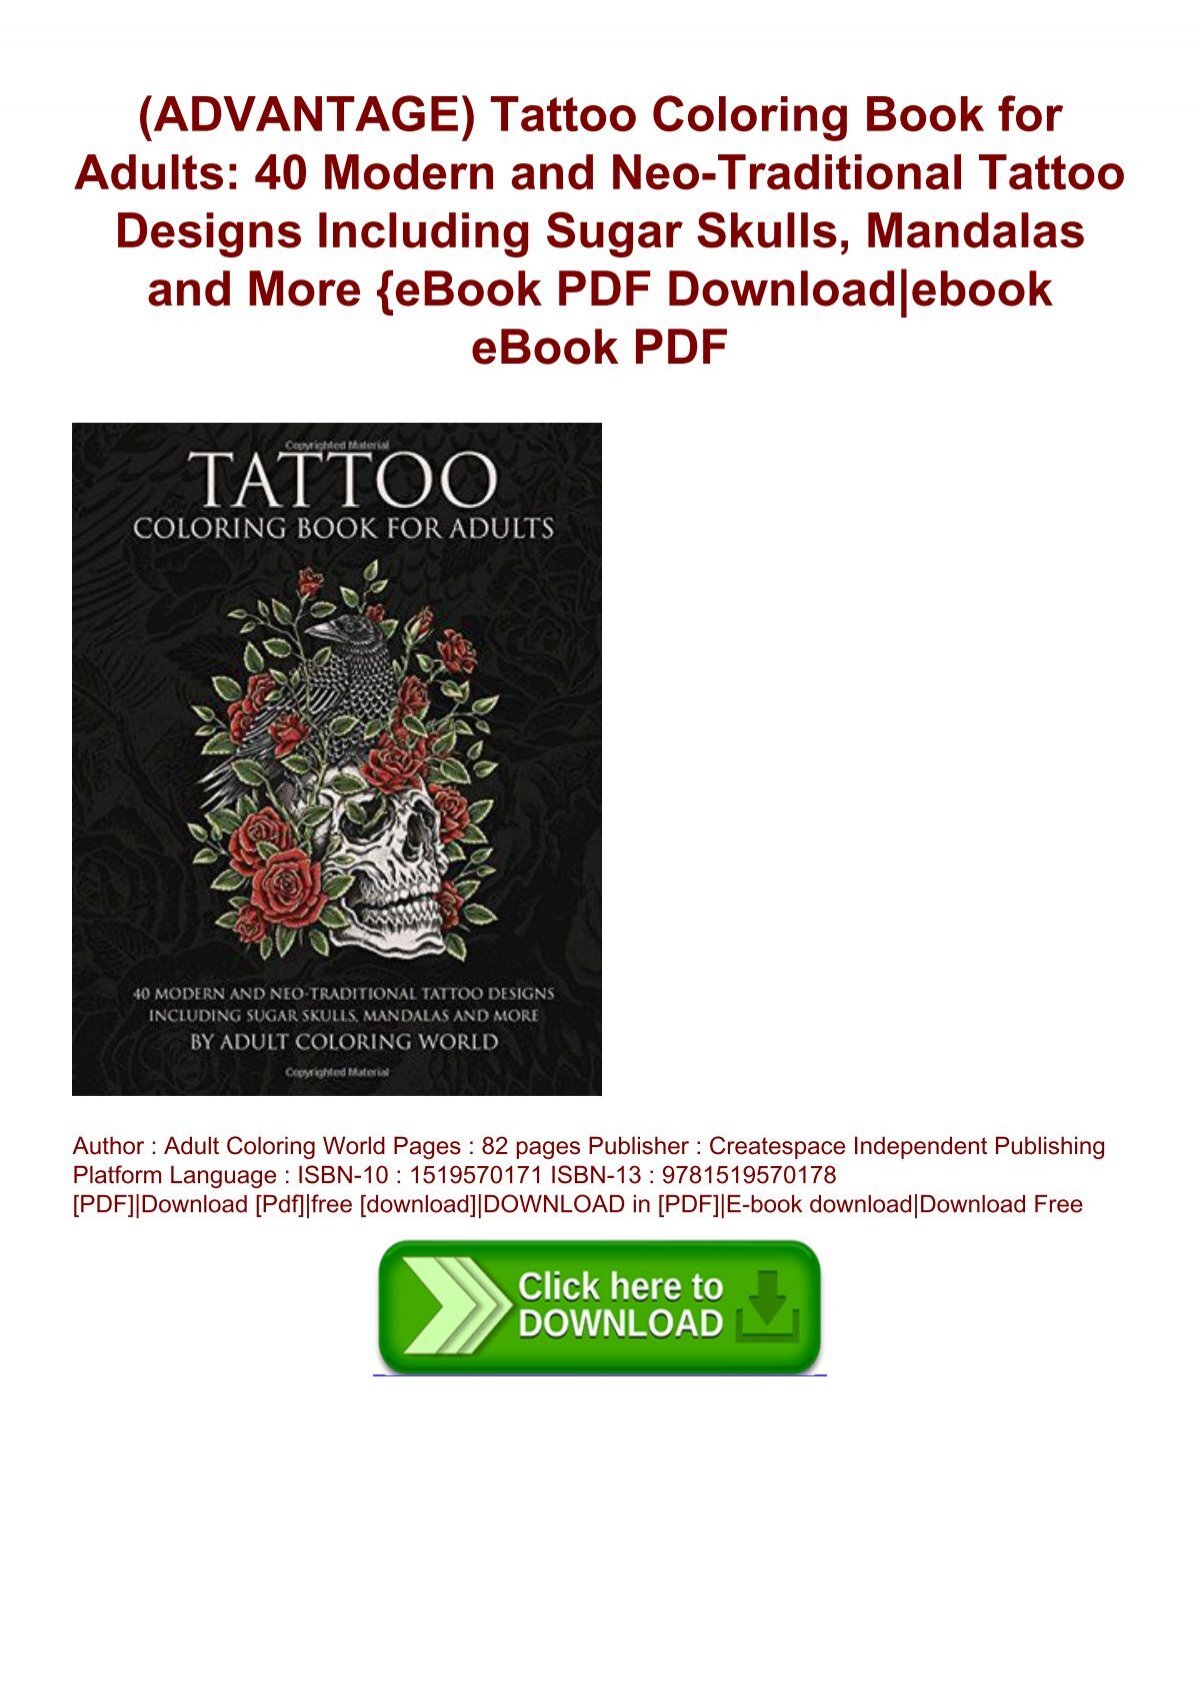 Download Advantage Tattoo Coloring Book For Adults 40 Modern And Neo Traditional Tattoo Designs Including Sugar Skulls Mandalas And More Ebook Pdf Download Ebook Ebook Pdf